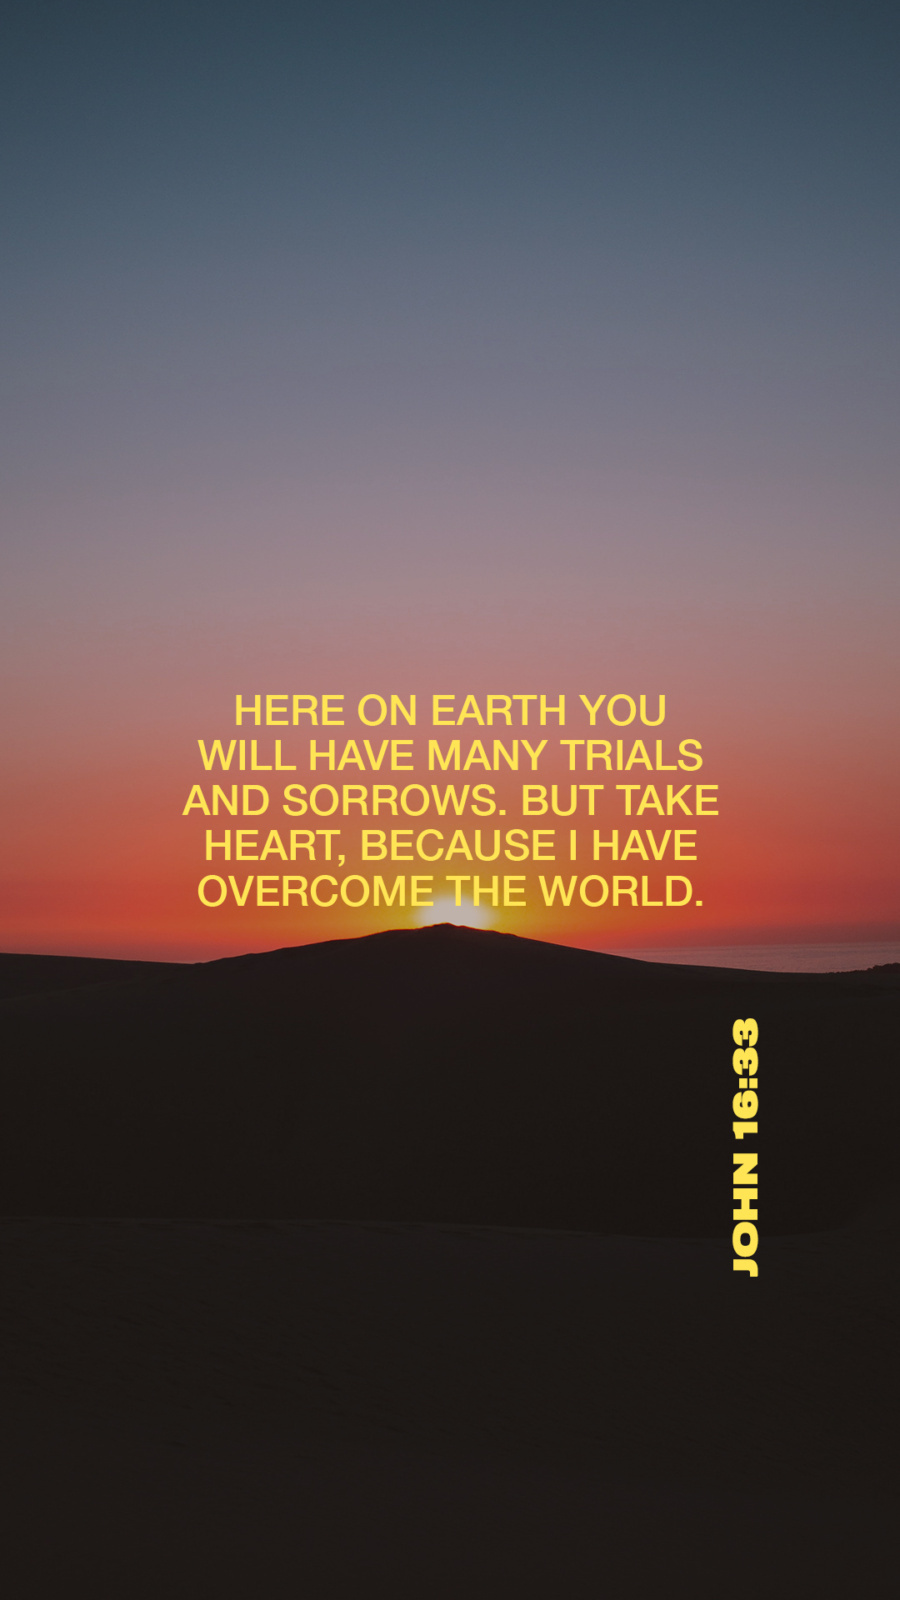 “I have told you all this so that you may have peace in me.&nbsp;Here on earth you will have many trials and sorrows. But take heart, because I have overcome the world.” (John 16:33)